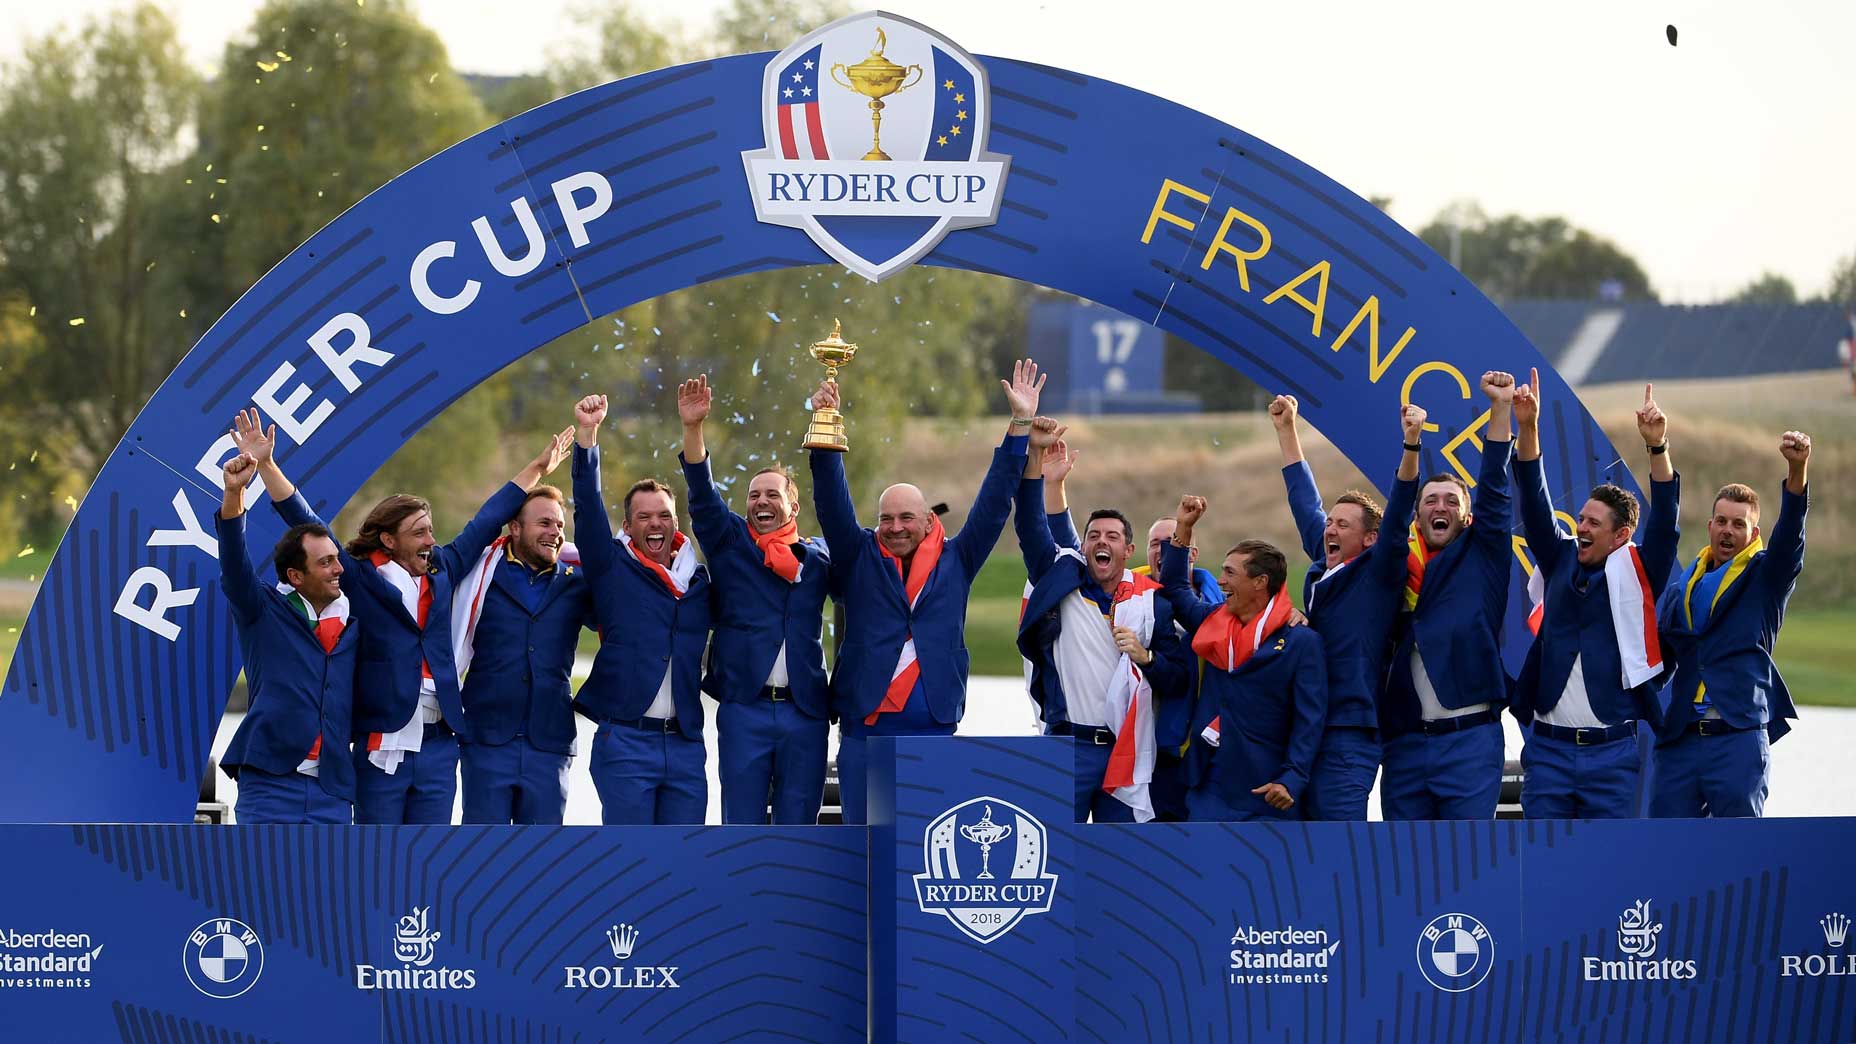 Ryder Cup history Who won the last Ryder Cup? Golf Products Review